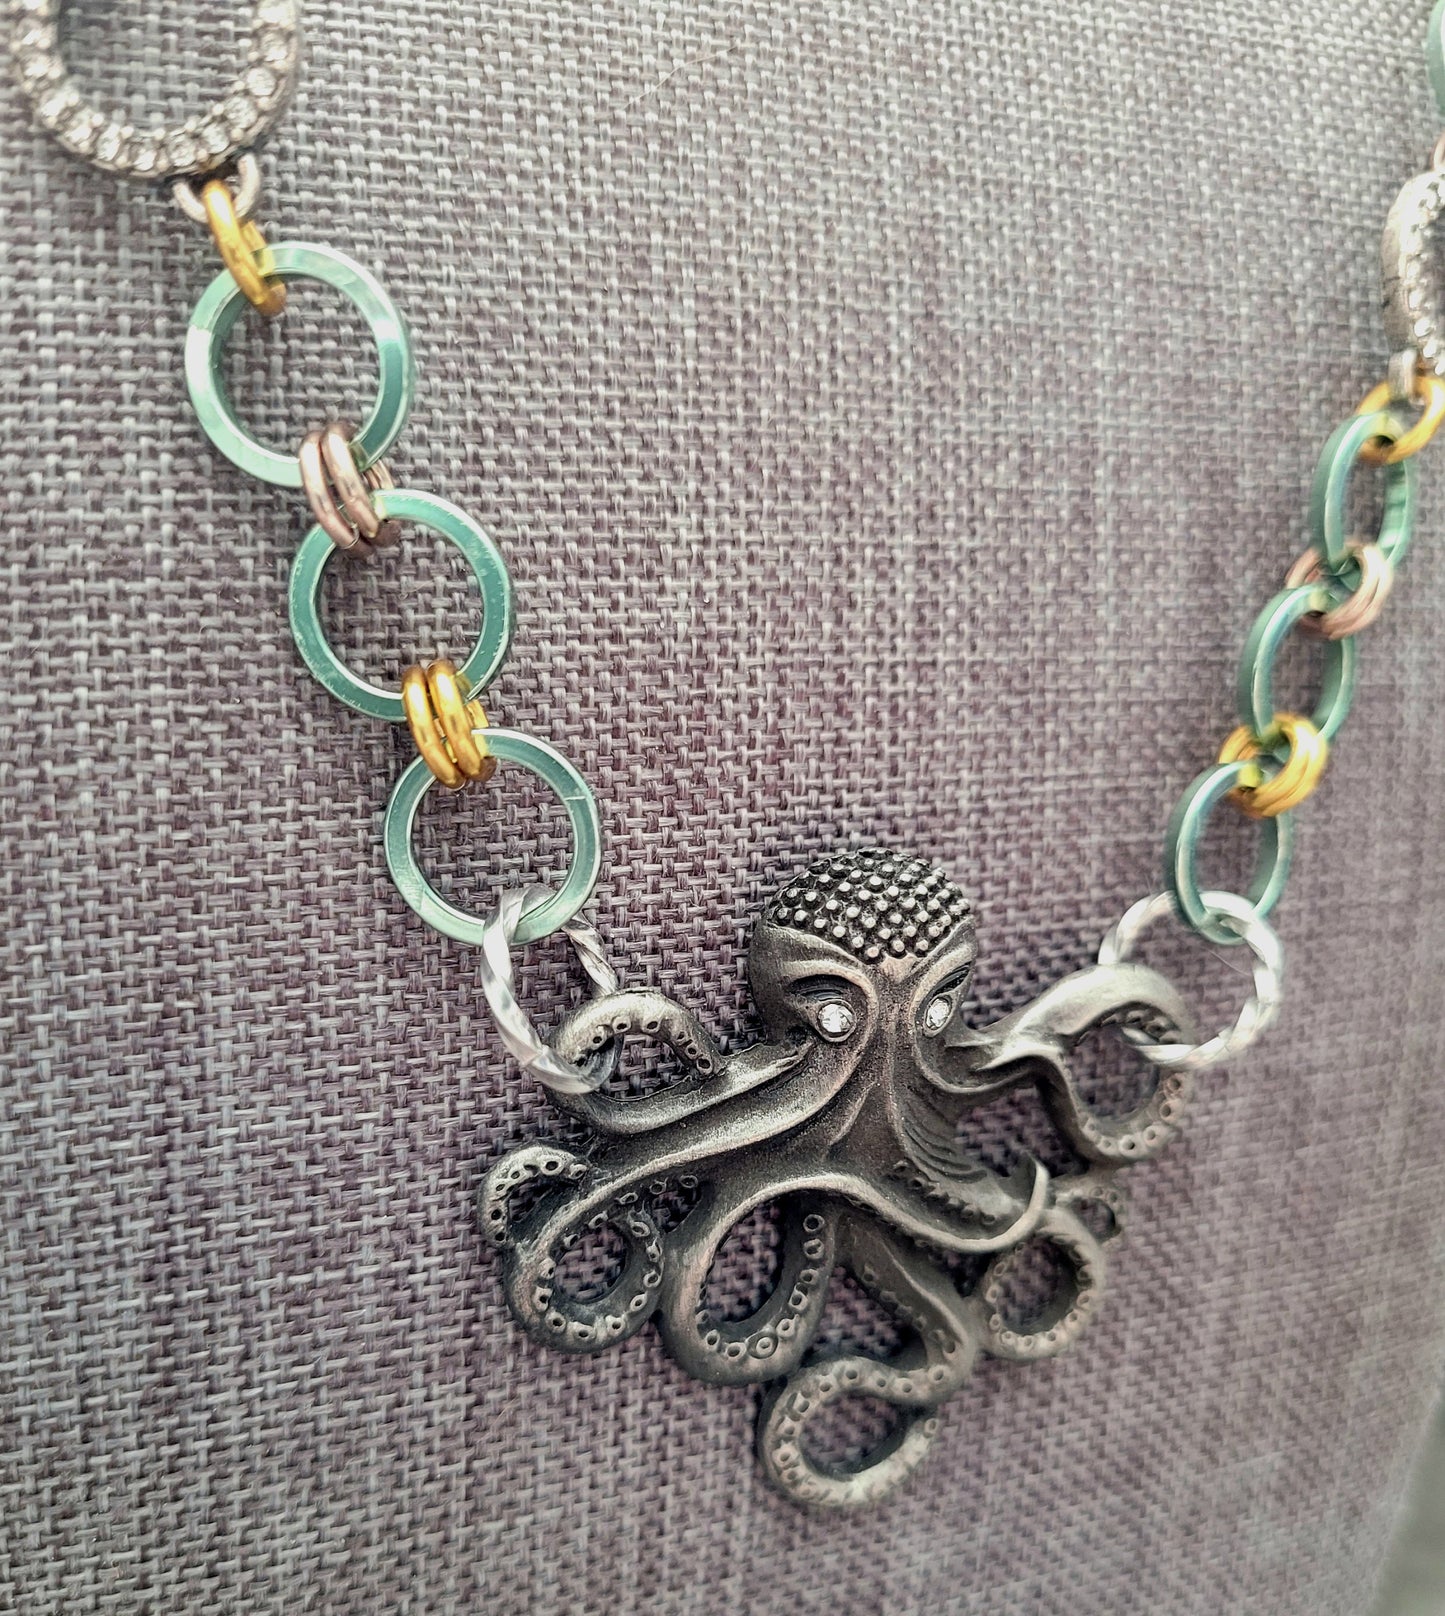 Octo-fabulous seafoam green chainmaille necklace